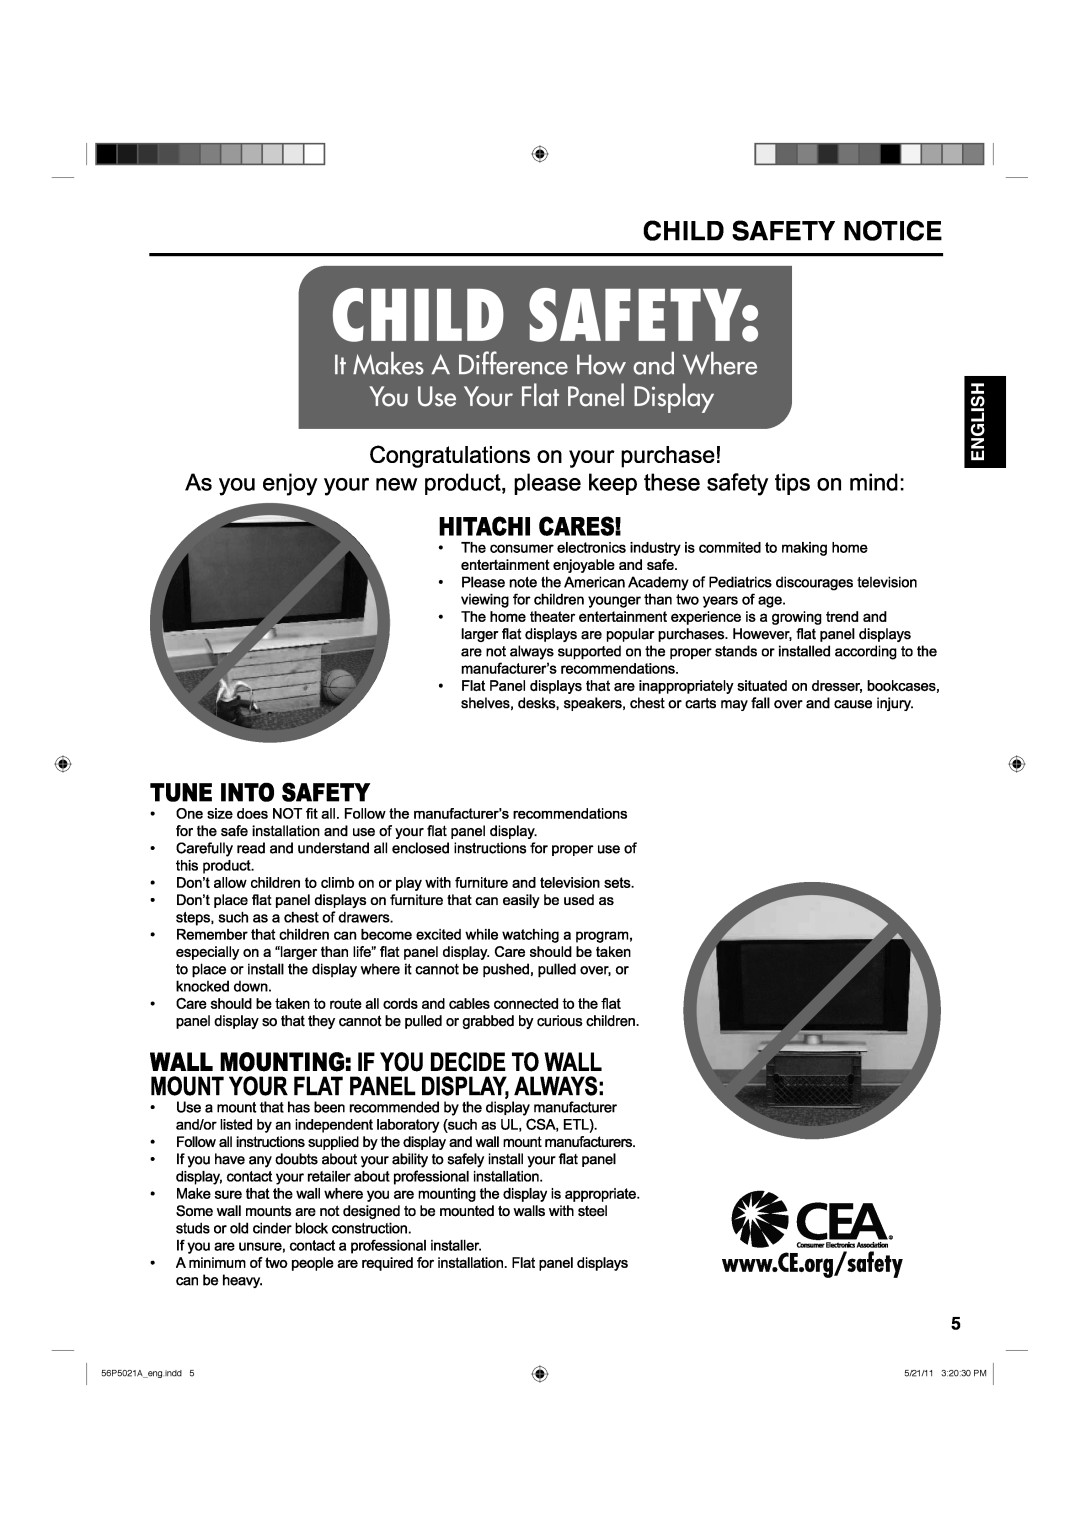 Hitachi L26D205 important safety instructions Child Safety Notice, English, 56P5021Aeng.indd, 5/21/11 32030 PM 